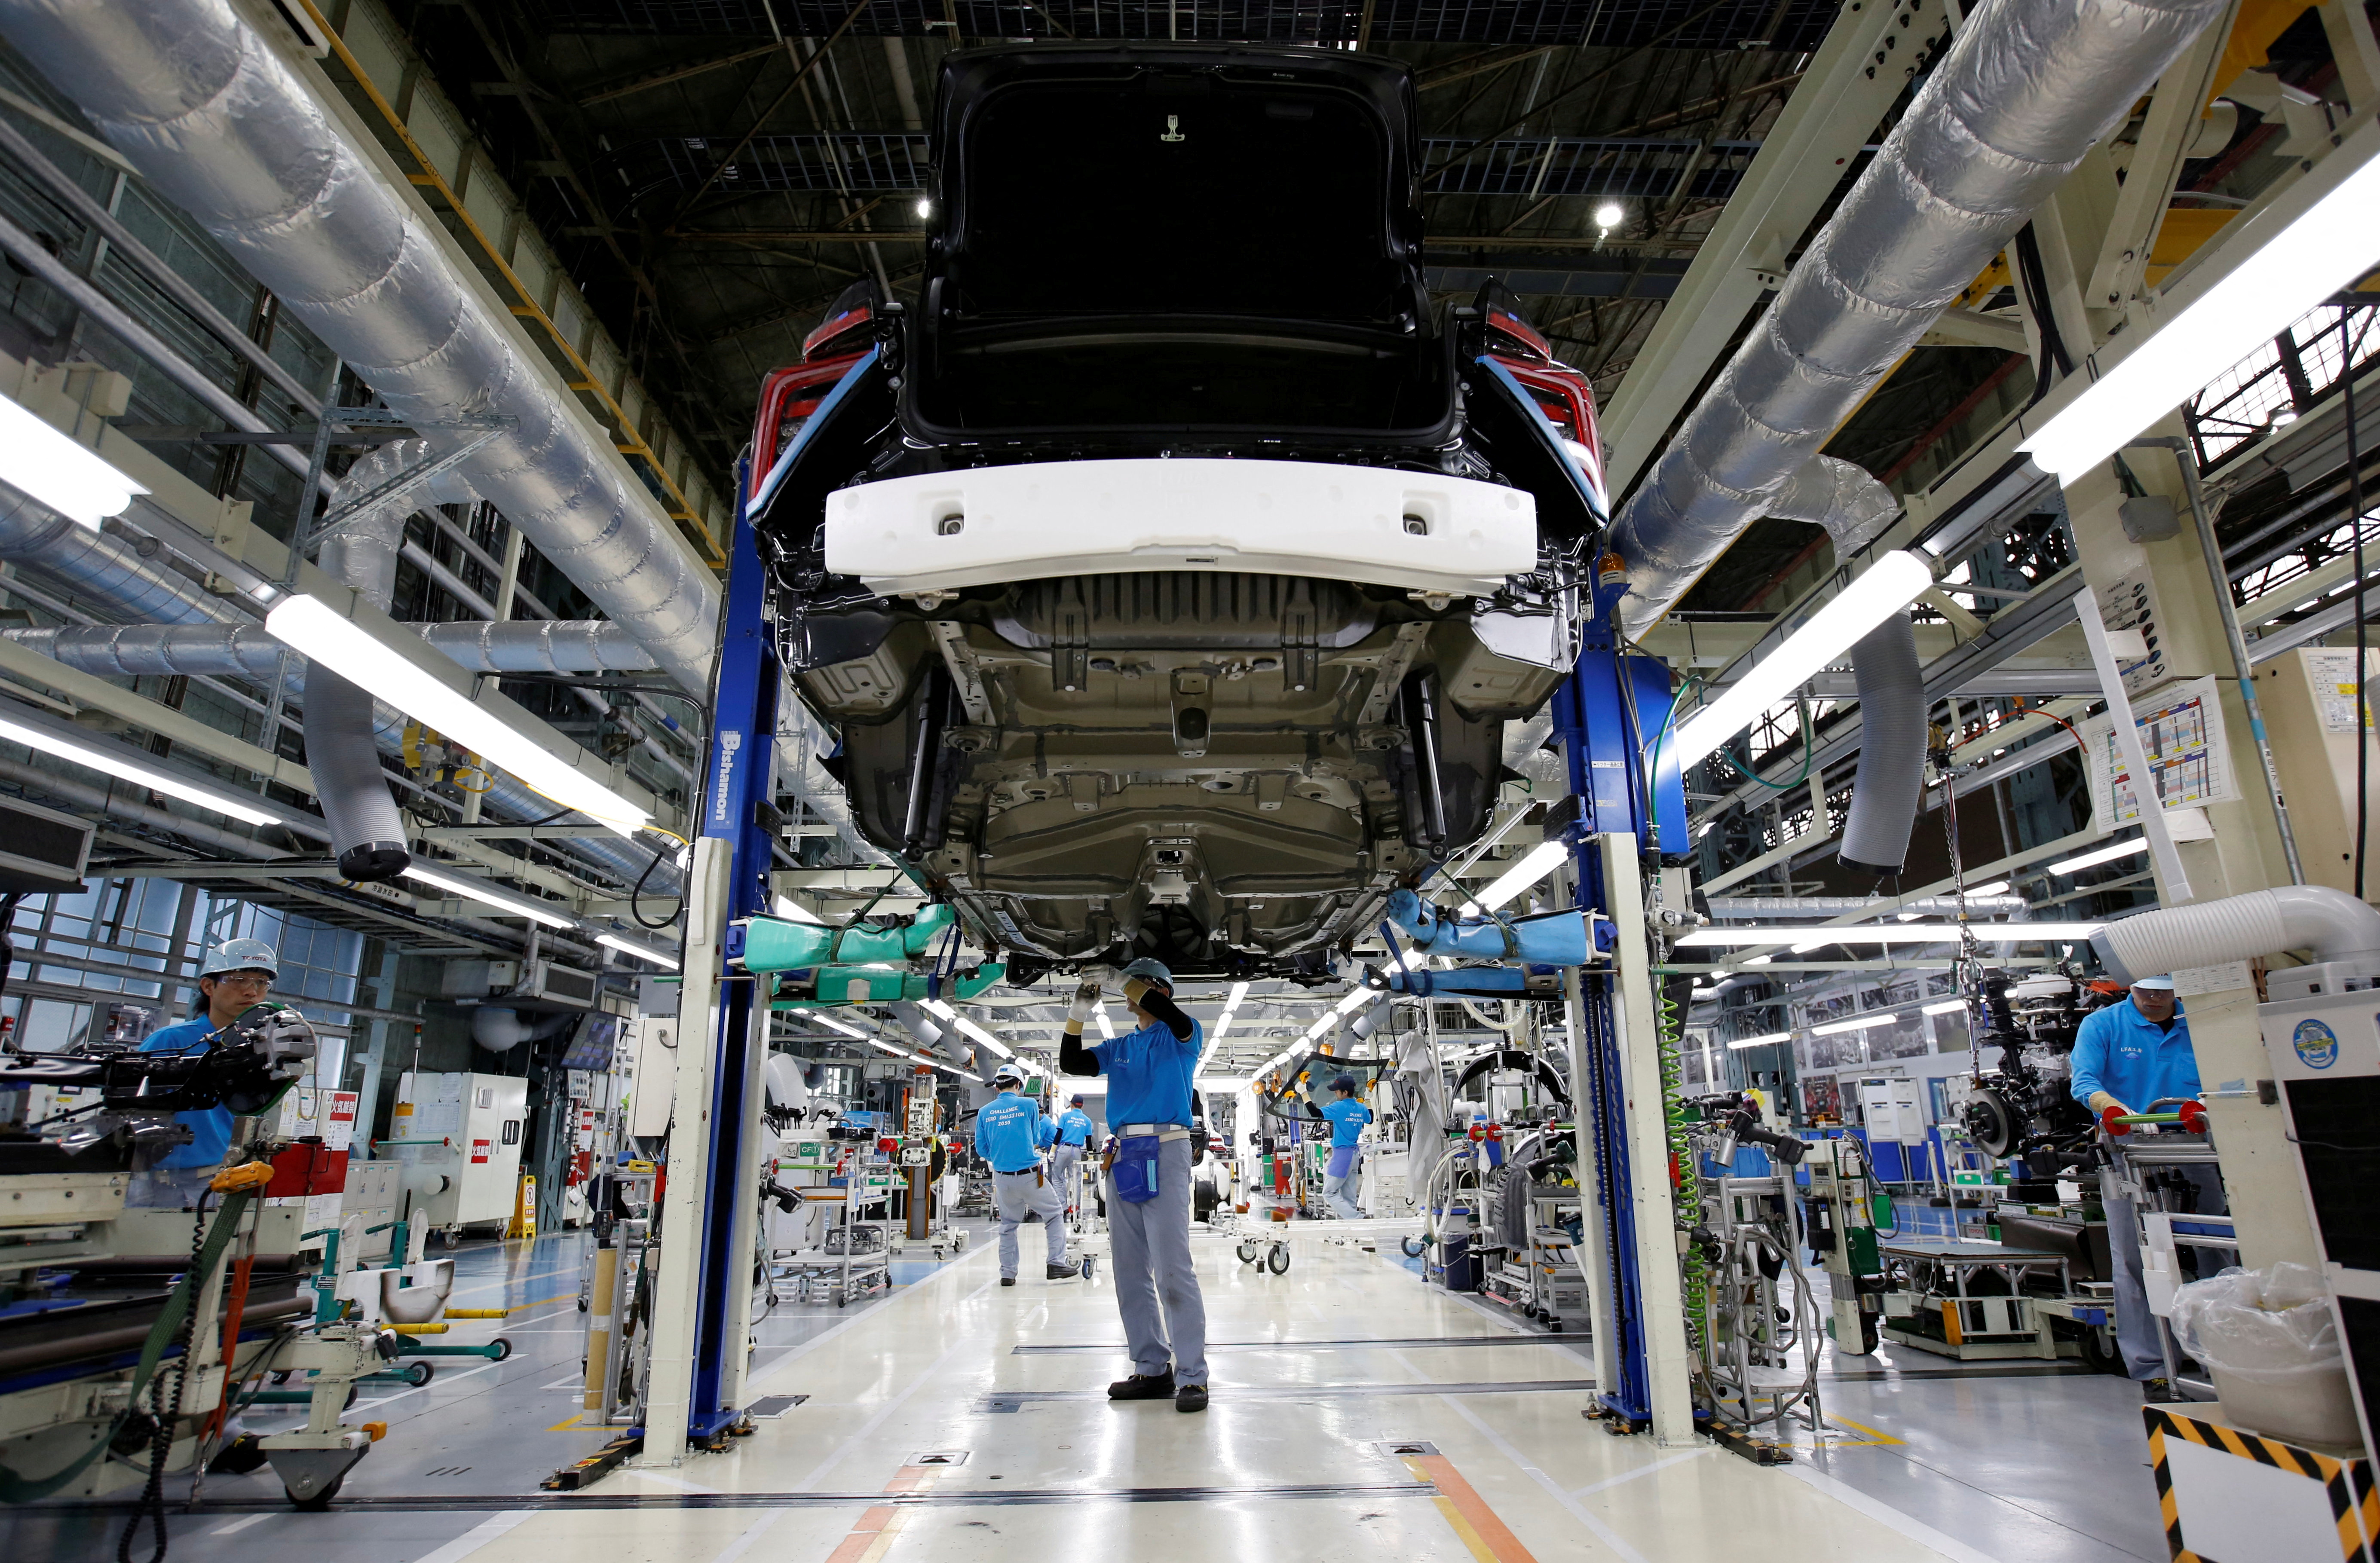 Employees of Toyota Motor Corp. work on assembly line